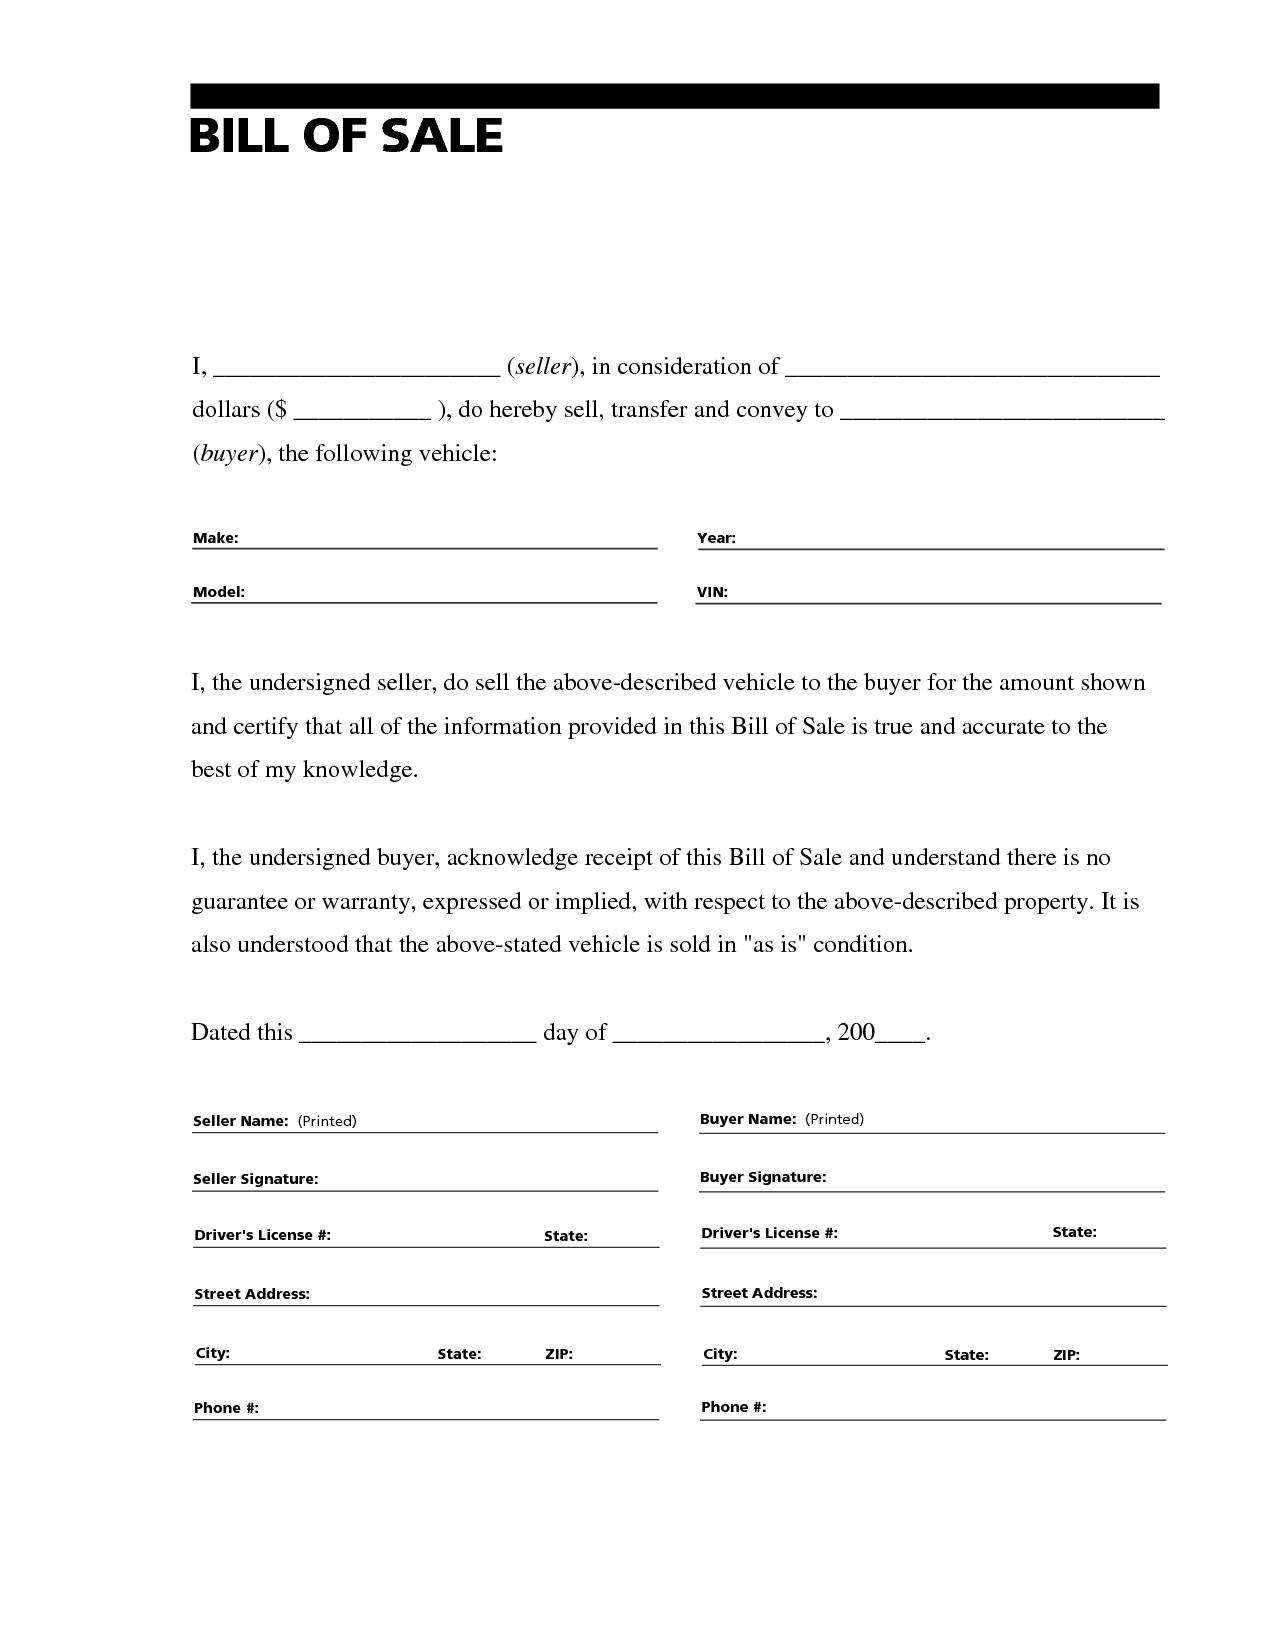 Free Printable Auto Bill Of Sale Form GENERIC 